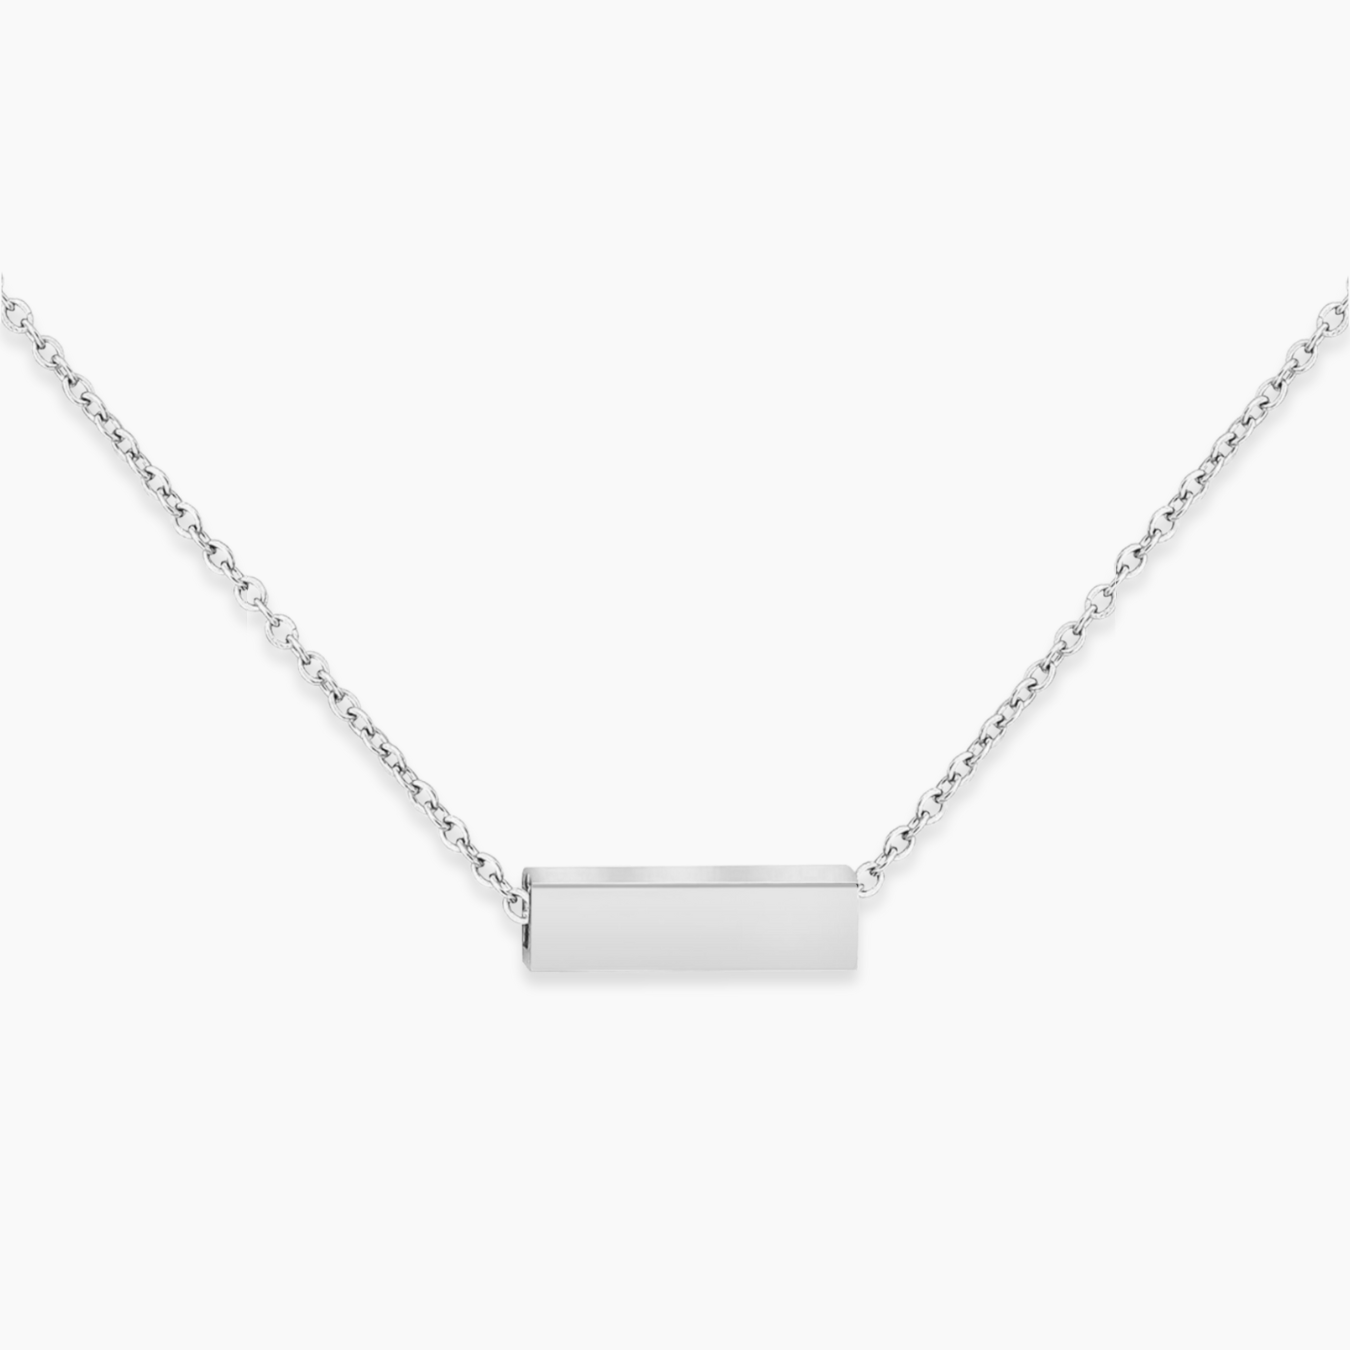 MINIMAL Personalizable Necklace | Custom Text